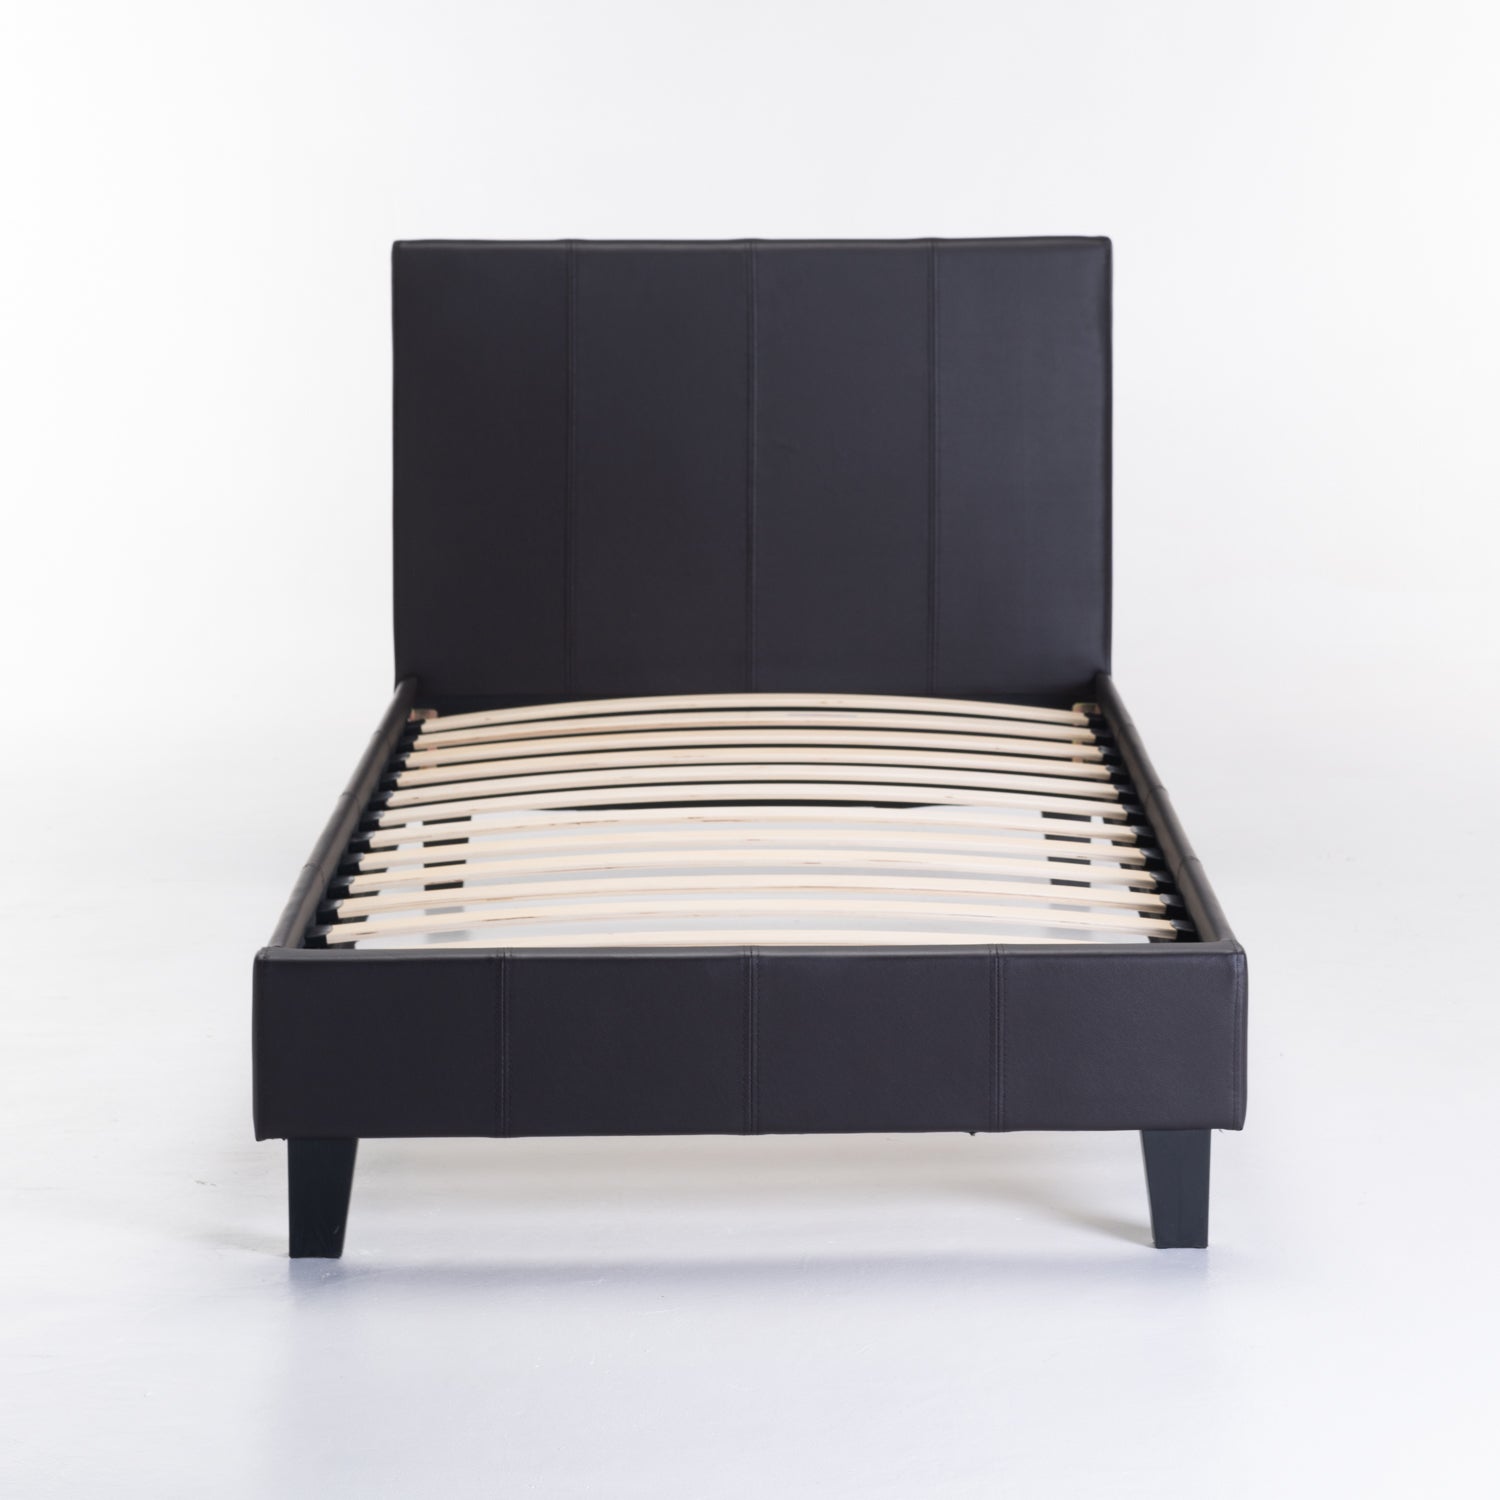 KYLE LEATHER TOUCH SINGLE BED - MATT BROWN